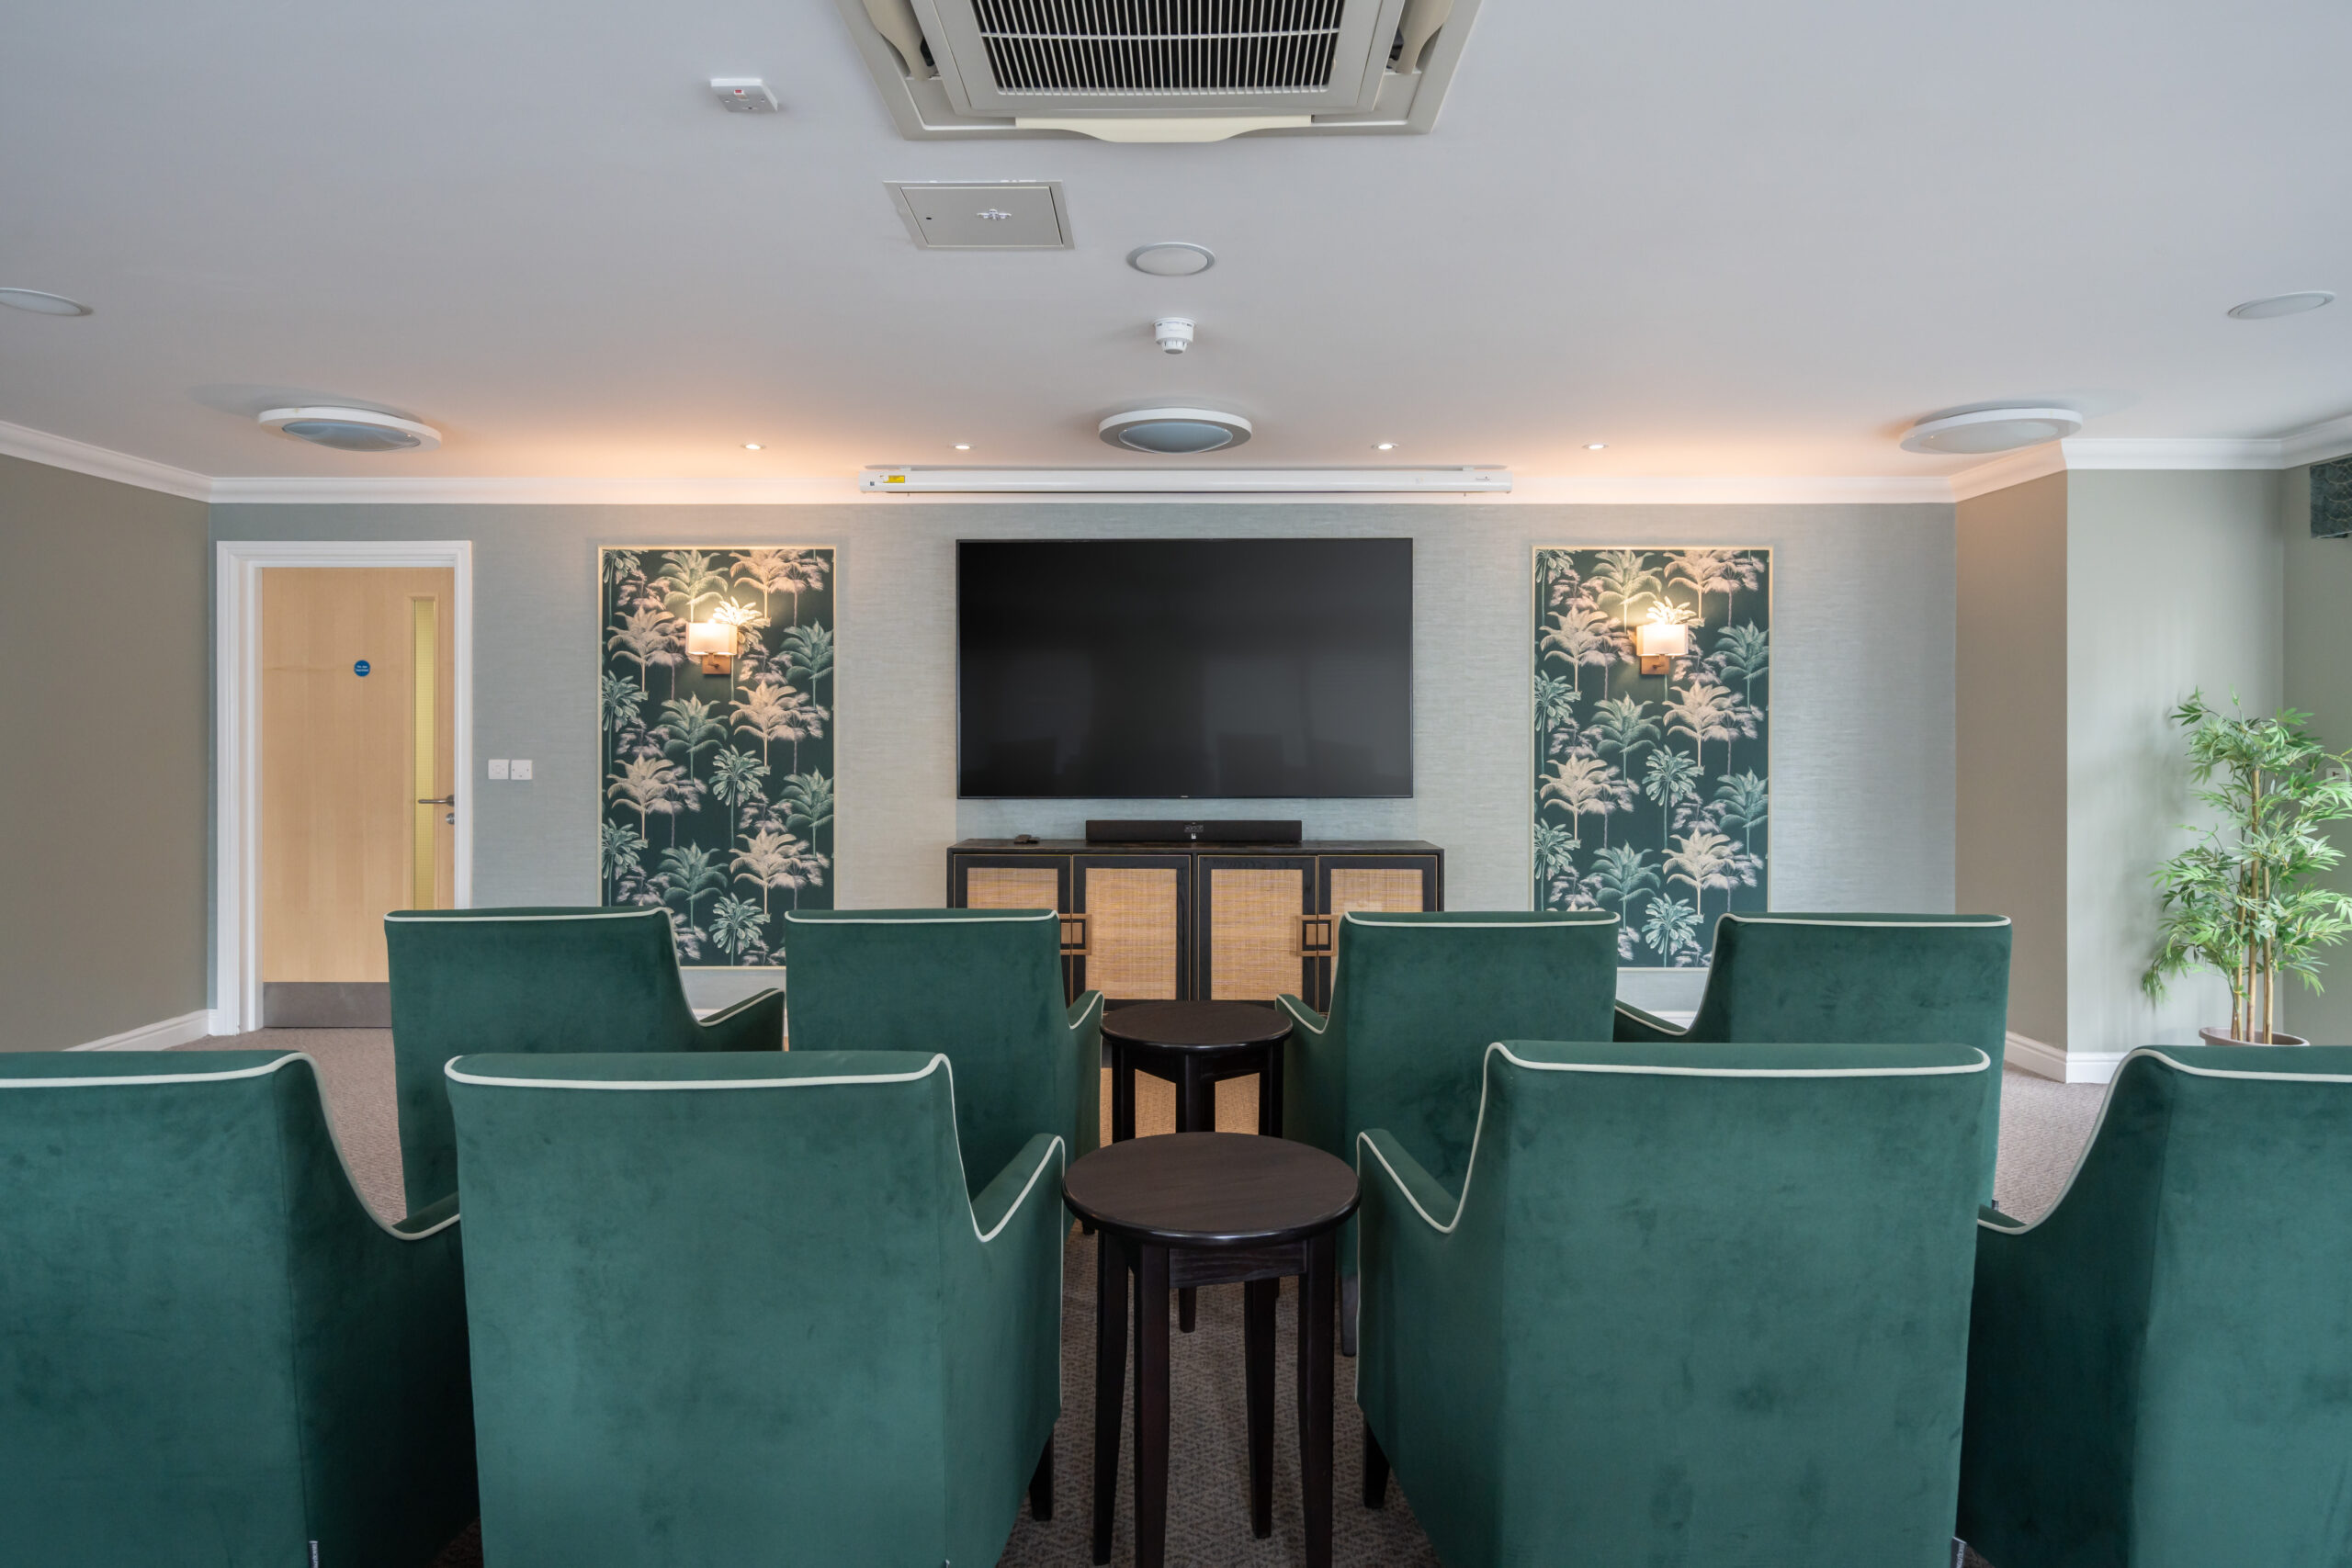 Hastings Court Care Home Cinema Room